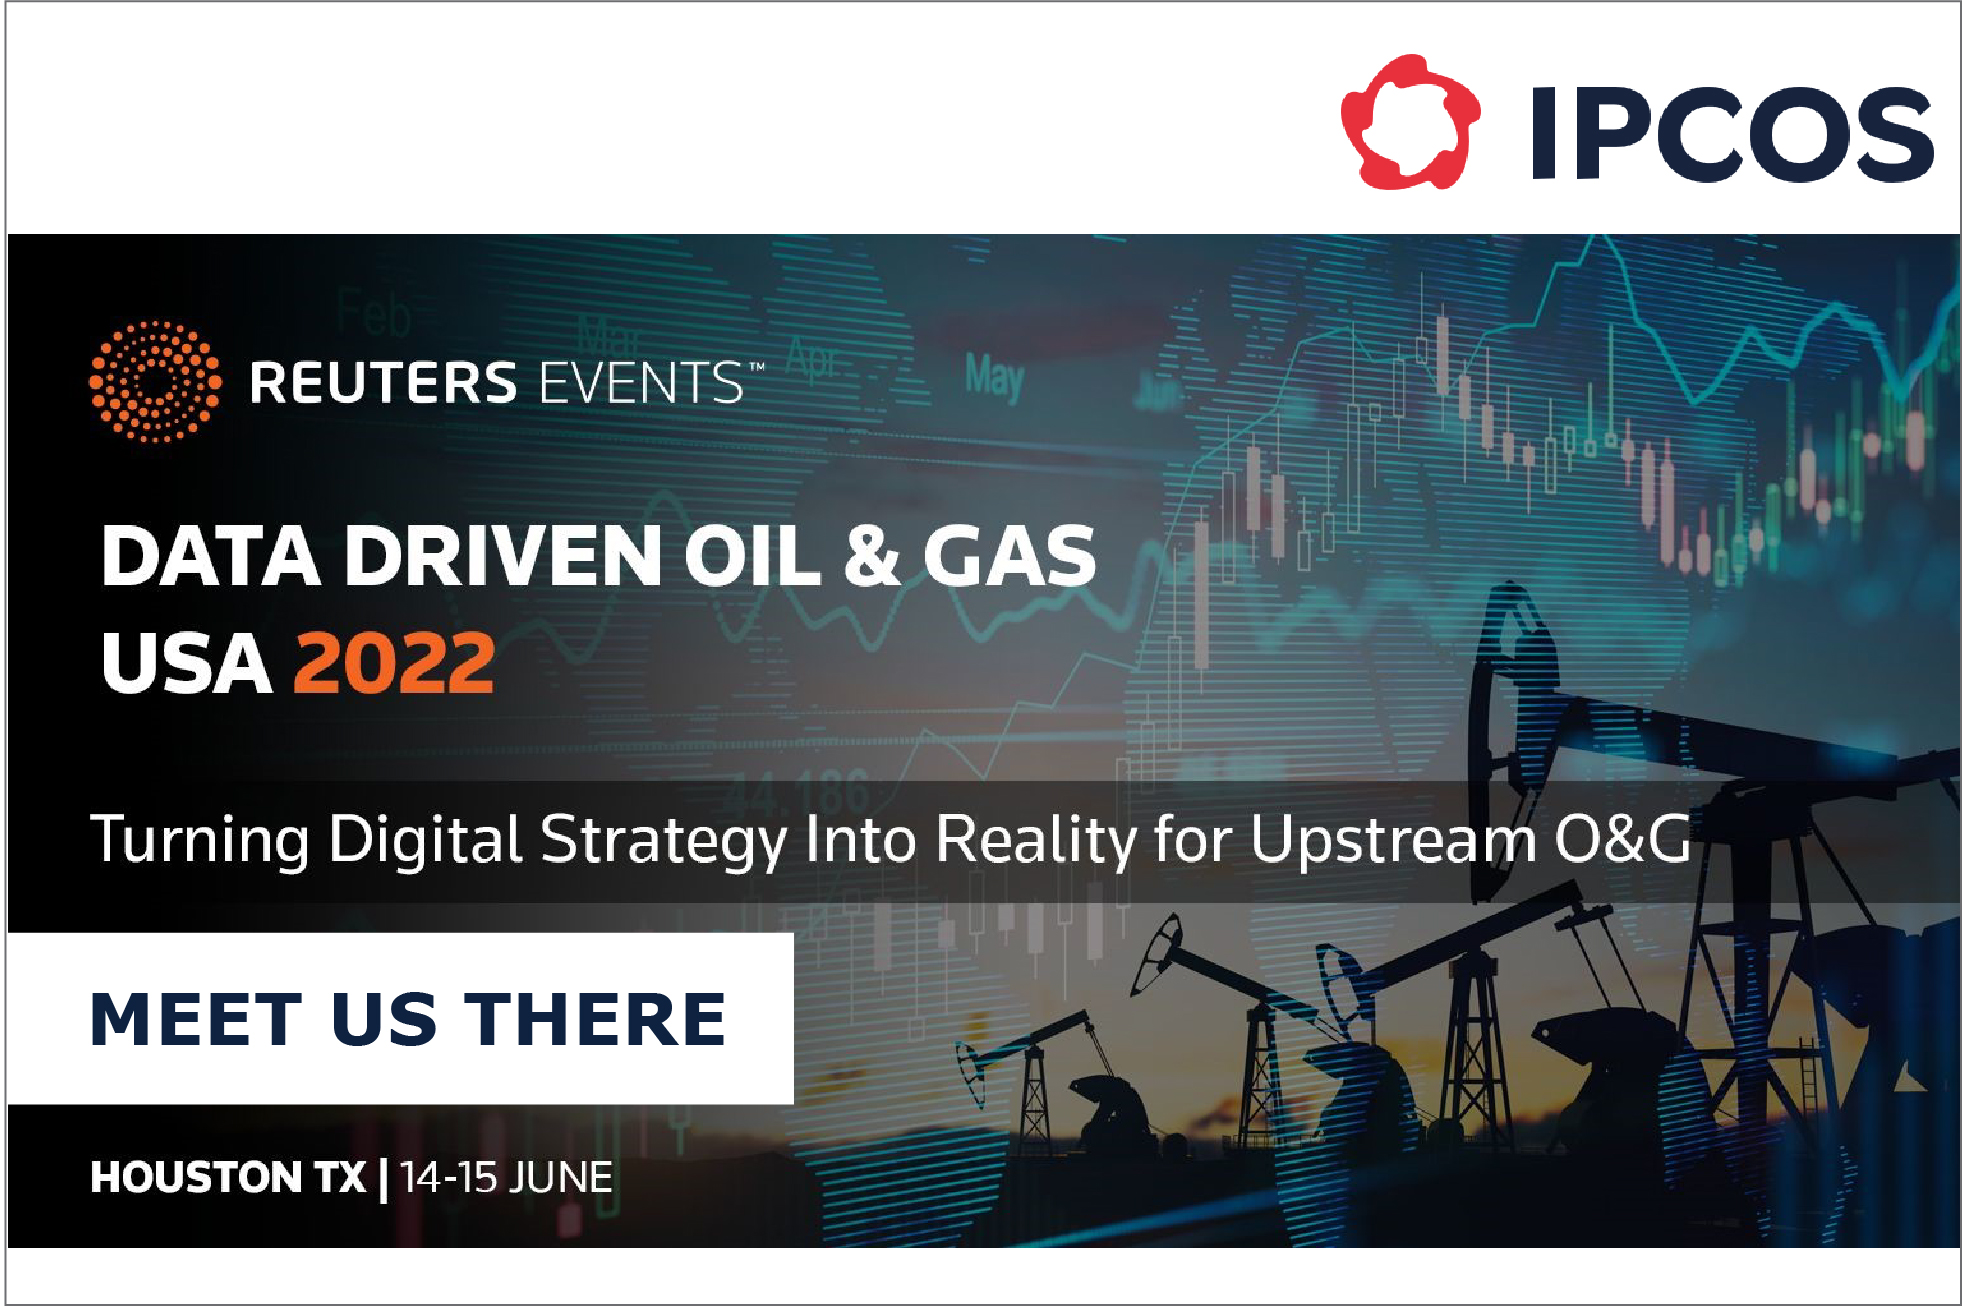 Digital oilfield IPCOS at the Data Driven Oil & Gas USA 2022 IPCOS